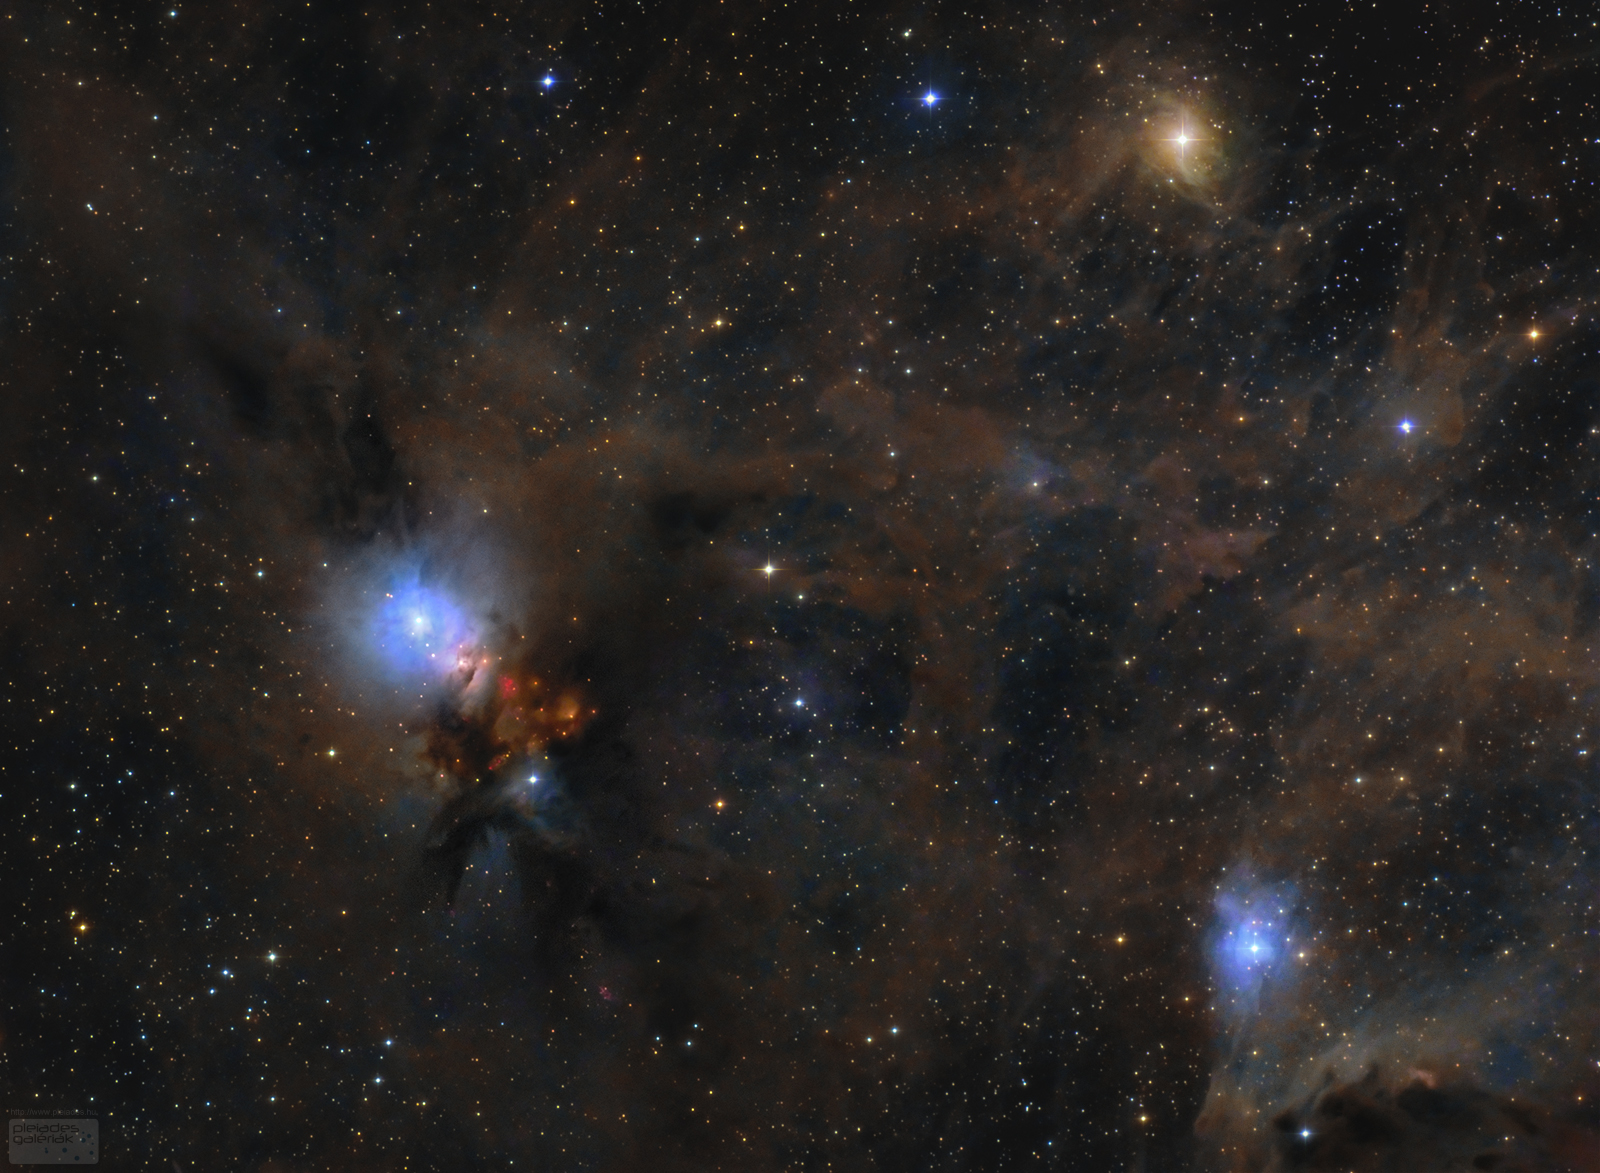 Astronomy Picture of the Day - Σελίδα 2 NGC1333v13v12fenyes